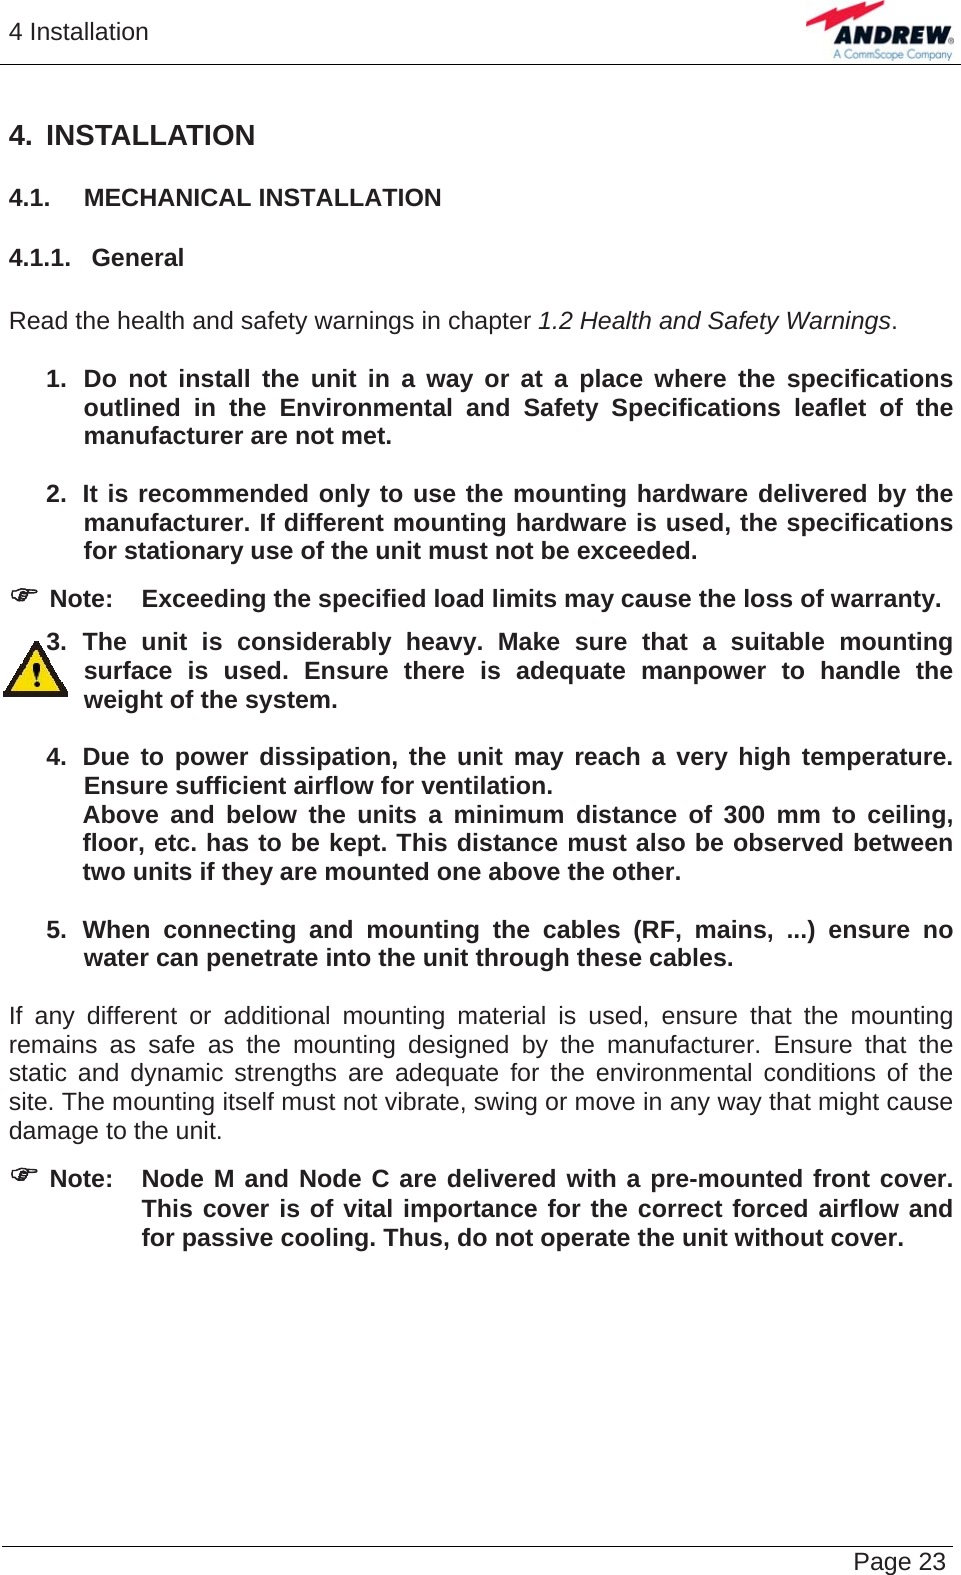 4 Installation   Page 234. INSTALLATION 4.1.  MECHANICAL INSTALLATION 4.1.1.  General  Read the health and safety warnings in chapter 1.2 Health and Safety Warnings.  1.  Do not install the unit in a way or at a place where the specifications outlined in the Environmental and Safety Specifications leaflet of the manufacturer are not met.  2.  It is recommended only to use the mounting hardware delivered by the manufacturer. If different mounting hardware is used, the specifications for stationary use of the unit must not be exceeded. ) Note:  Exceeding the specified load limits may cause the loss of warranty. 3. The unit is considerably heavy. Make sure that a suitable mounting surface is used. Ensure there is adequate manpower to handle the weight of the system.  4.  Due to power dissipation, the unit may reach a very high temperature. Ensure sufficient airflow for ventilation.   Above and below the units a minimum distance of 300 mm to ceiling,   floor, etc. has to be kept. This distance must also be observed between   two units if they are mounted one above the other.  5. When connecting and mounting the cables (RF, mains, ...) ensure no water can penetrate into the unit through these cables.  If any different or additional mounting material is used, ensure that the mounting remains as safe as the mounting designed by the manufacturer. Ensure that the static and dynamic strengths are adequate for the environmental conditions of the site. The mounting itself must not vibrate, swing or move in any way that might cause damage to the unit. ) Note:  Node M and Node C are delivered with a pre-mounted front cover. This cover is of vital importance for the correct forced airflow and for passive cooling. Thus, do not operate the unit without cover.    